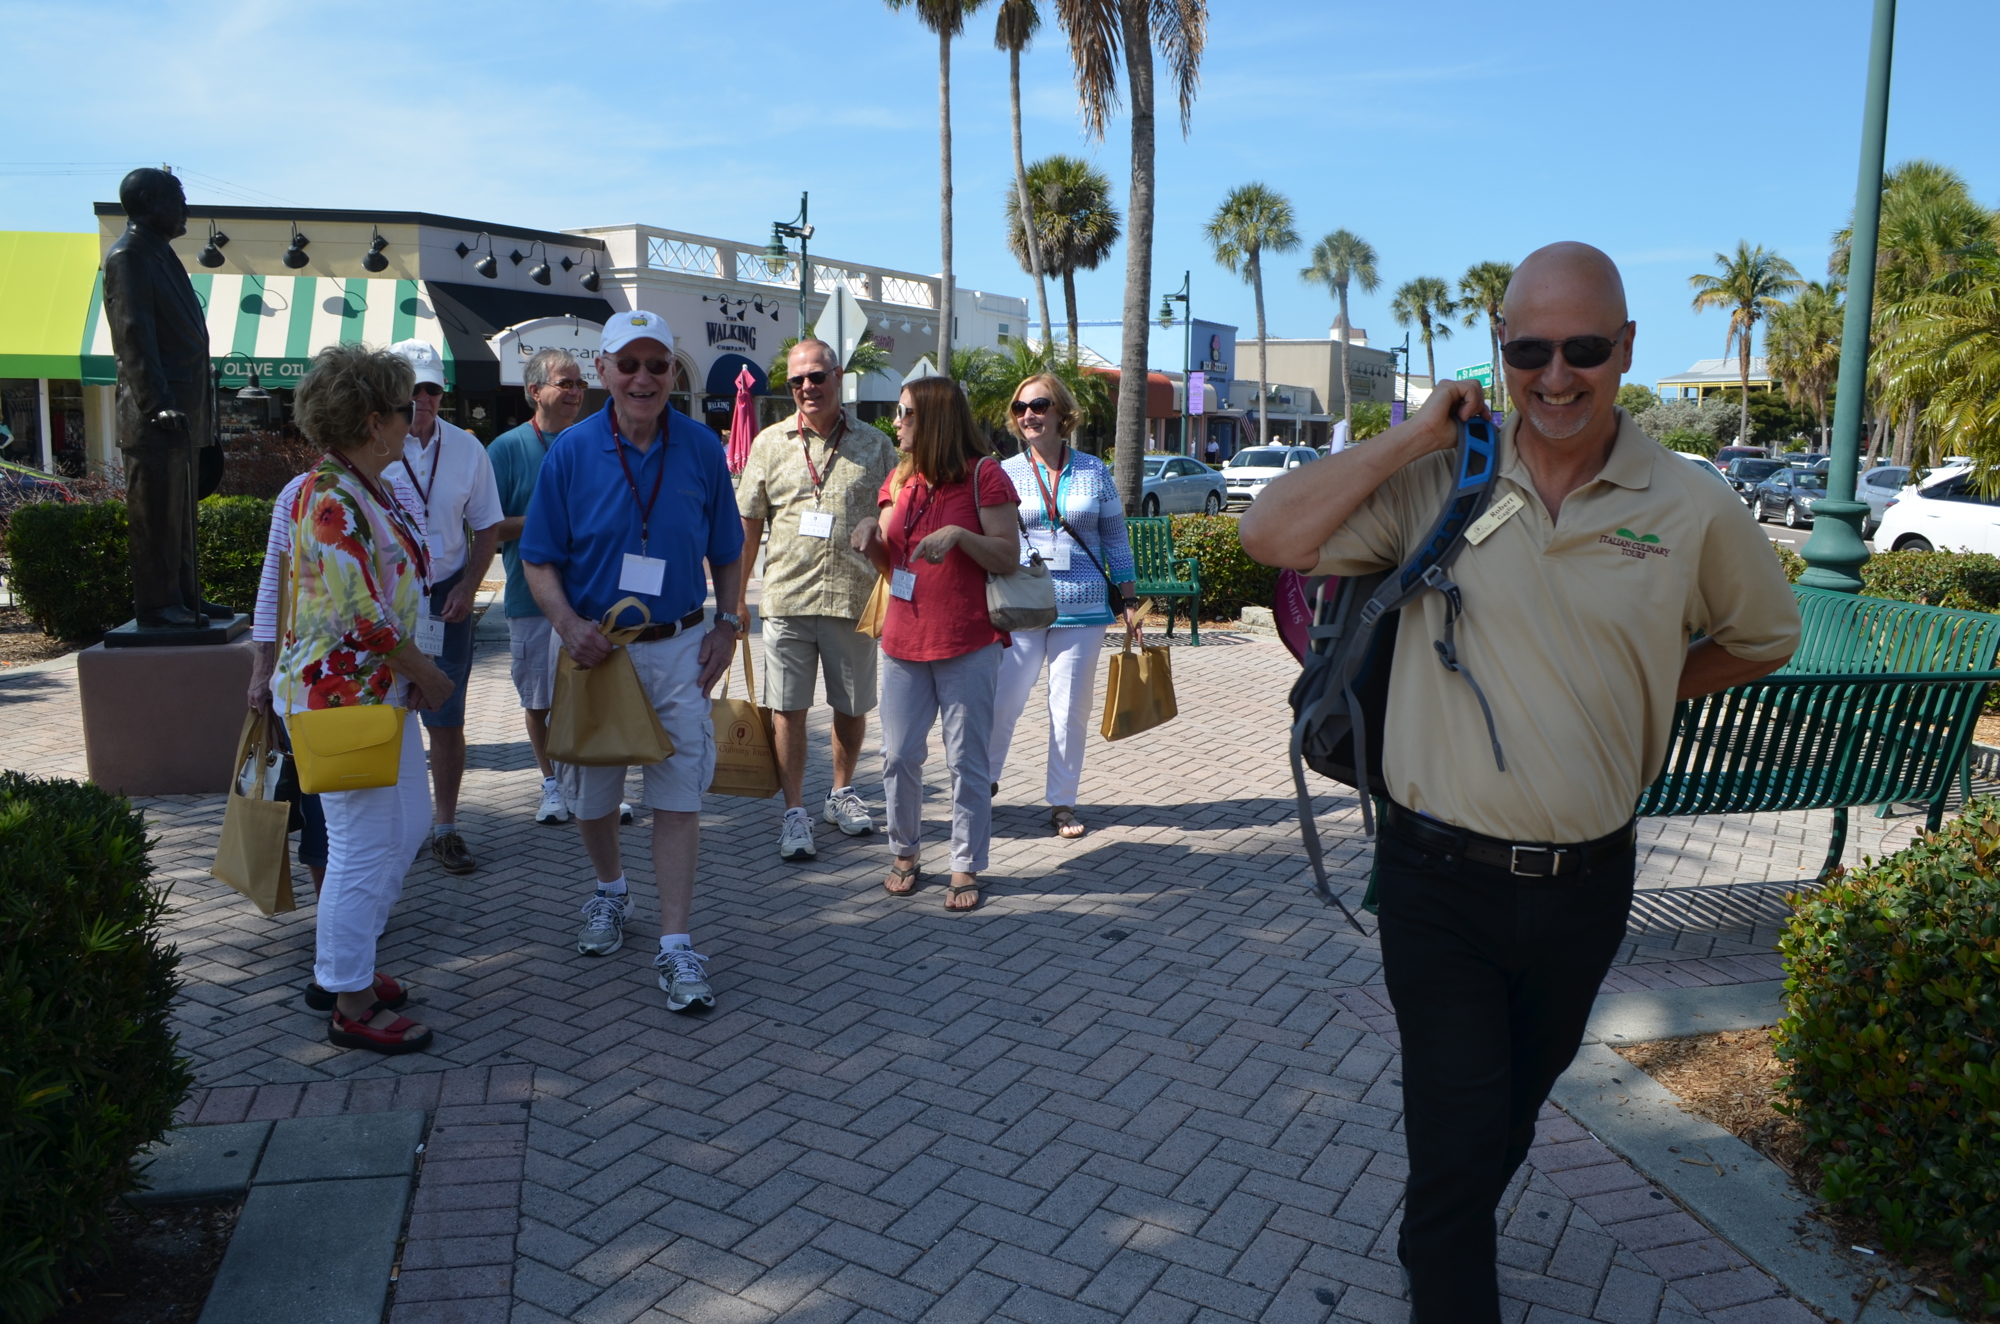 Robert Gaglio guides a tour, starting at the John Ringling statue on St. Armands Circle.